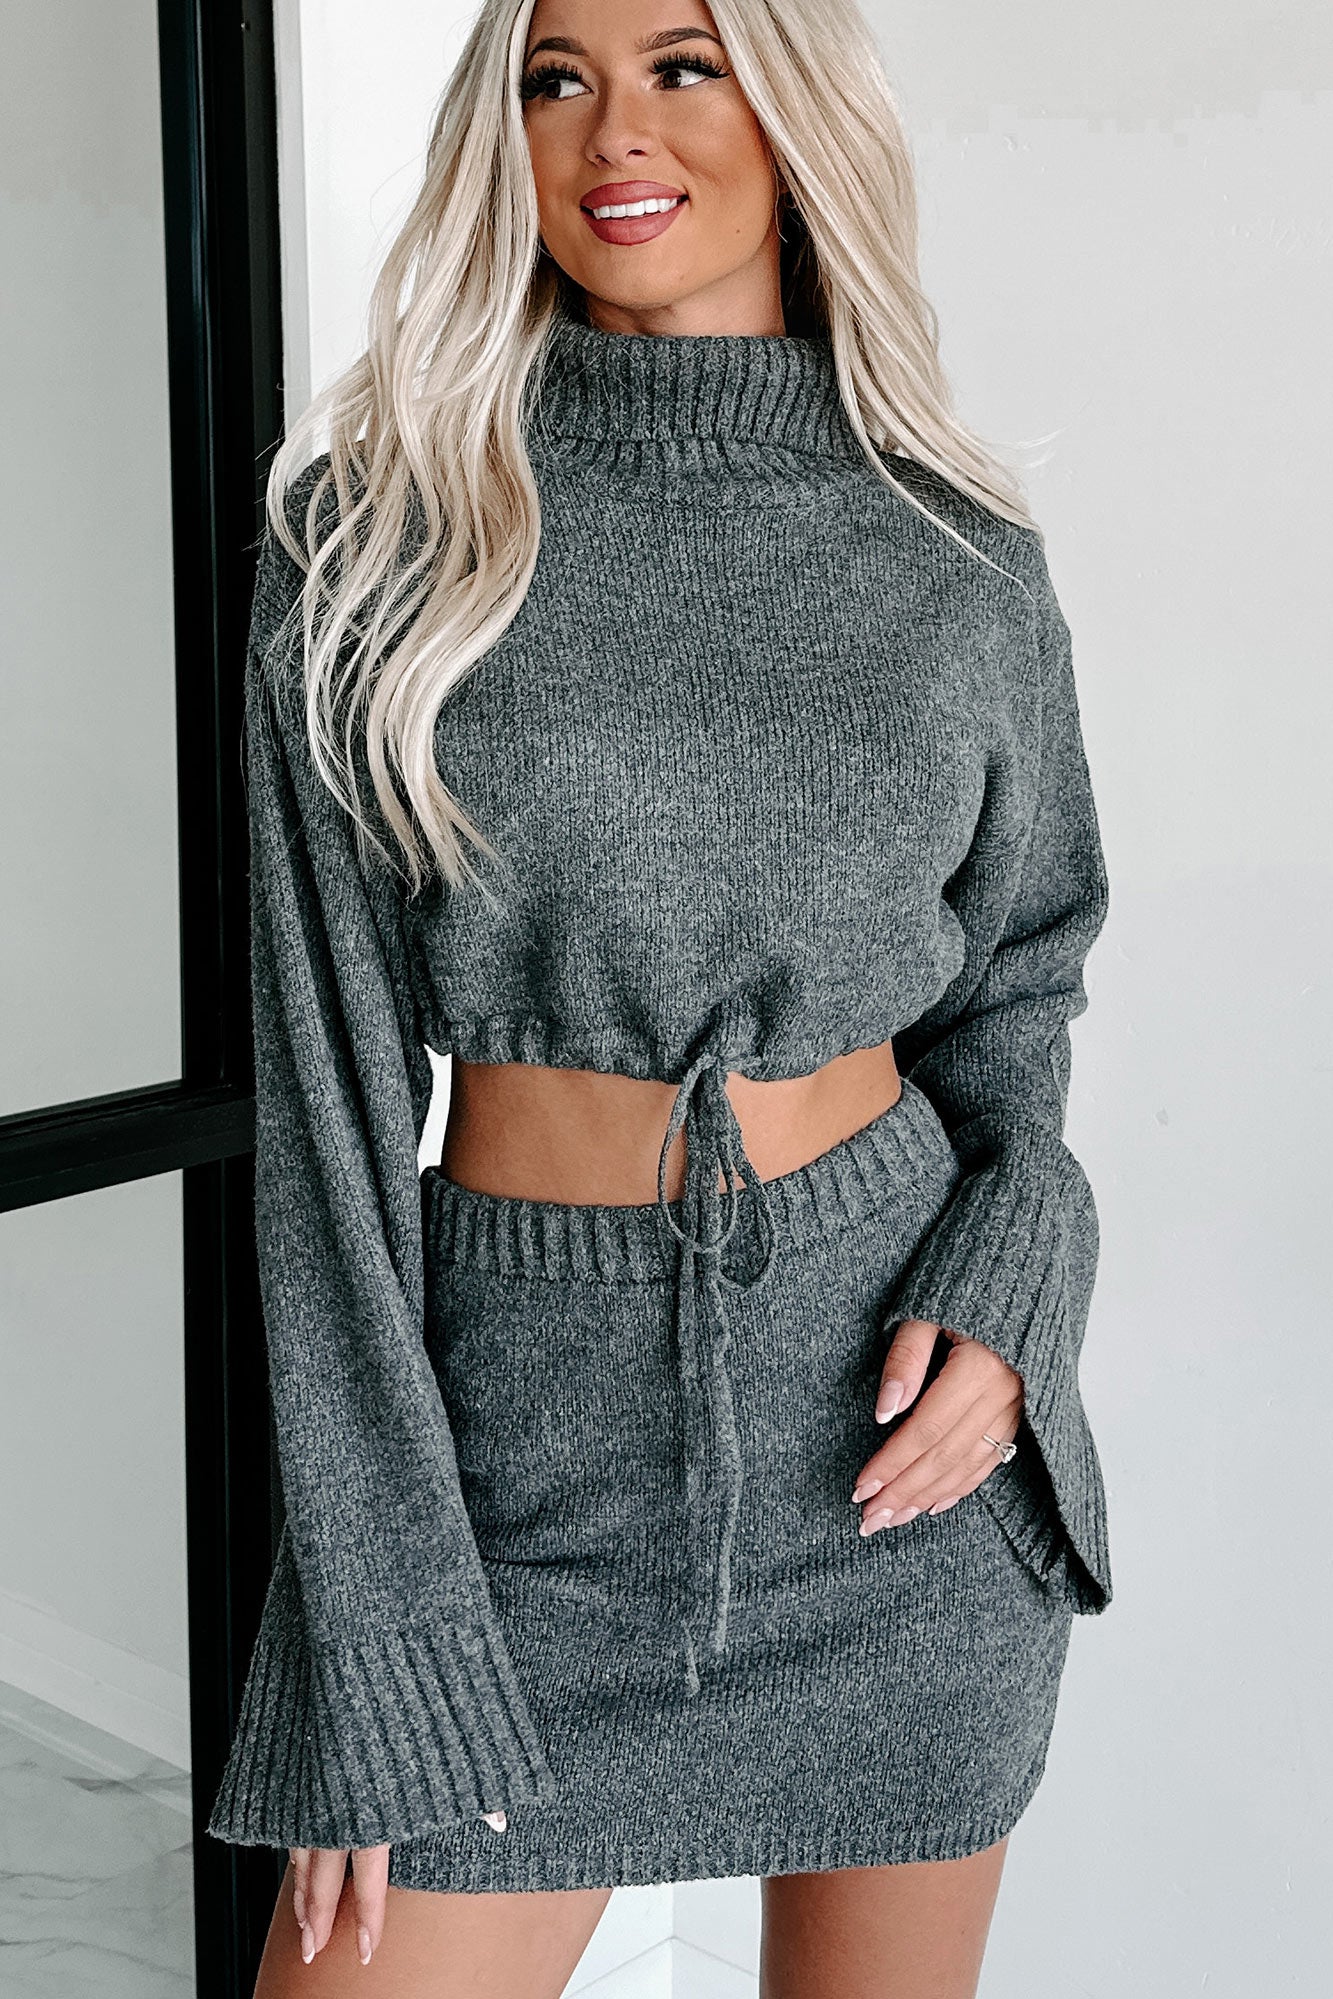 Change In The Weather Sweater Knit Crop Top & Skirt Set (Charcoal ...